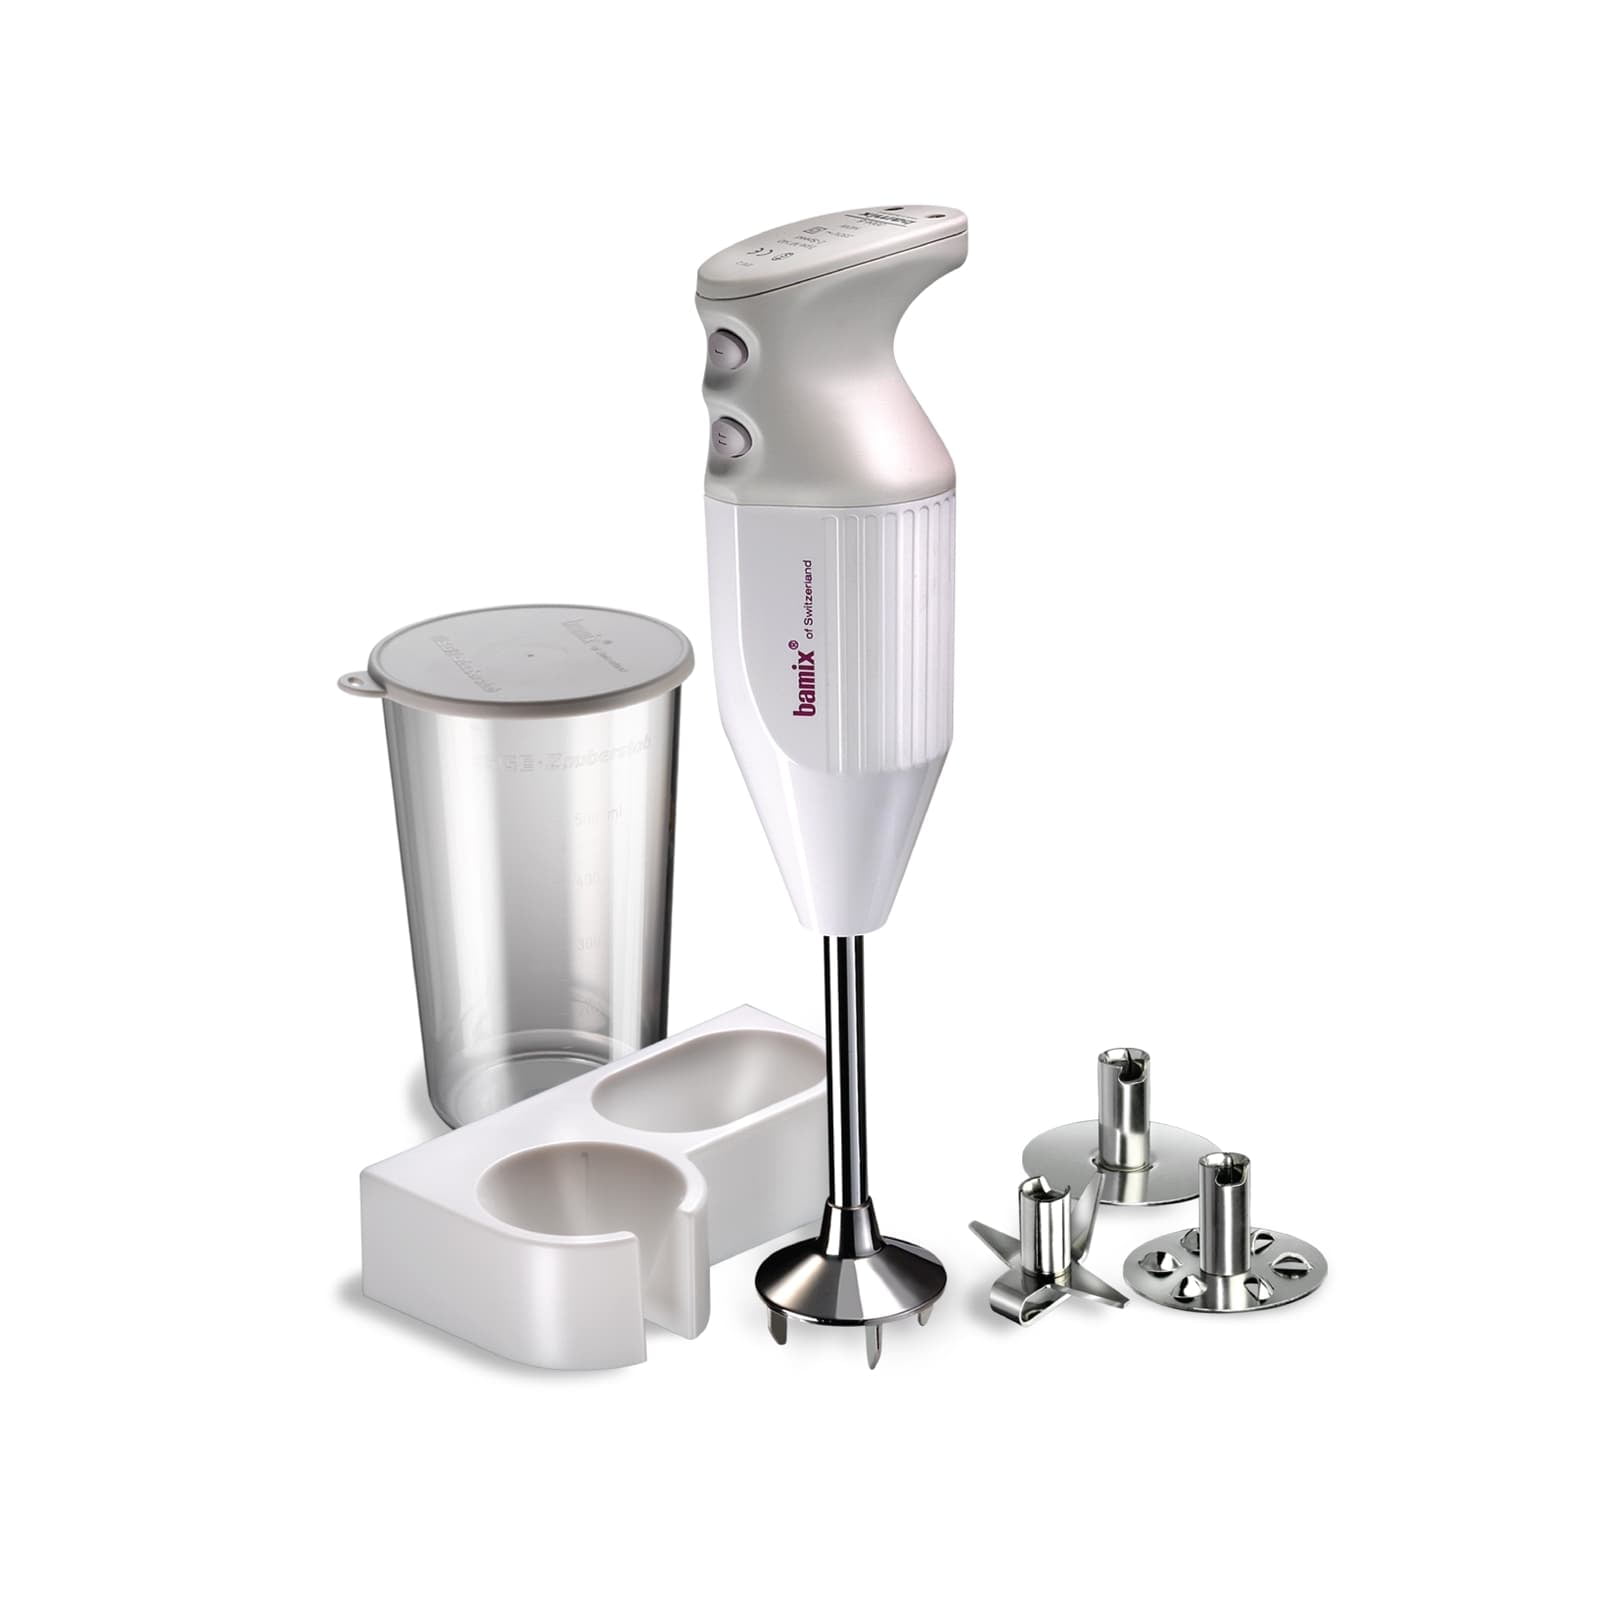 aulola bamix Hand blender clutch aicok chef-hub and others bestek 